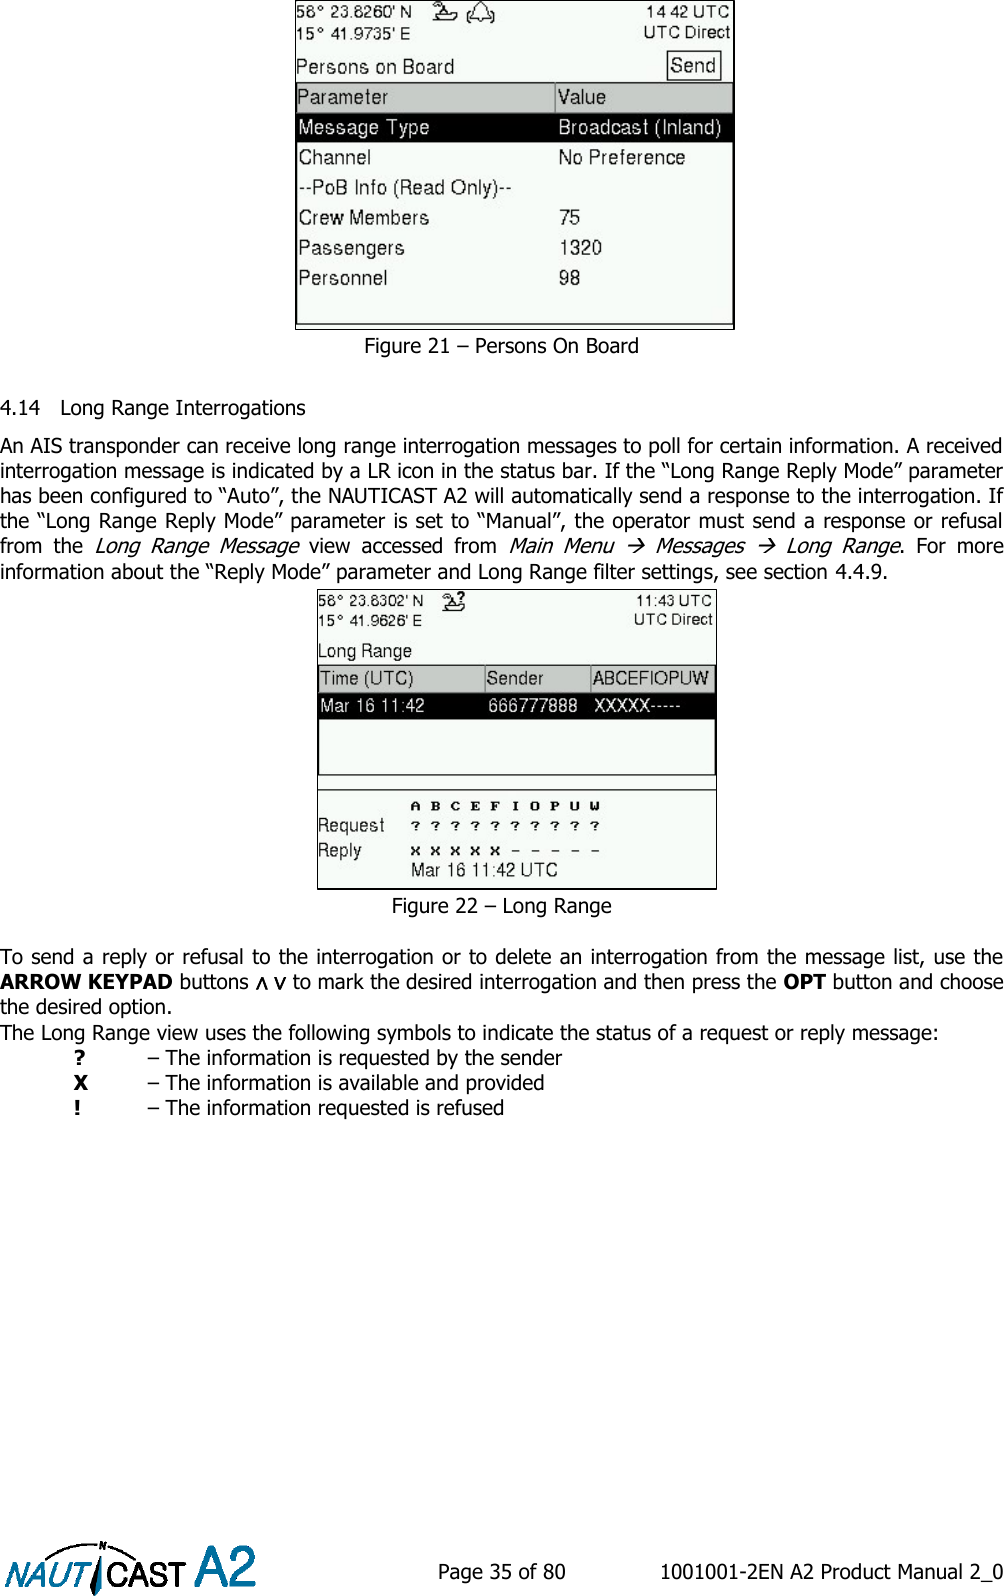    Page 35 of 80  1001001-2EN A2 Product Manual 2_0   Figure 21 – Persons On Board  4.14 Long Range Interrogations An AIS transponder can receive long range interrogation messages to poll for certain information. A received interrogation message is indicated by a LR icon in the status bar. If the “Long Range Reply Mode” parameter has been configured to “Auto”, the NAUTICAST A2 will automatically send a response to the interrogation. If the “Long Range Reply Mode” parameter is set to “Manual”, the operator must send a response or refusal from  the Long  Range  Message  view  accessed  from Main  Menu    Messages    Long  Range.  For  more information about the “Reply Mode” parameter and Long Range filter settings, see section 4.4.9.  Figure 22 – Long Range  To send a reply or refusal to the interrogation or to delete an interrogation from the message list, use the ARROW KEYPAD buttons ∧ ∨ to mark the desired interrogation and then press the OPT button and choose the desired option.   The Long Range view uses the following symbols to indicate the status of a request or reply message:  ? – The information is requested by the sender  X  – The information is available and provided  !  – The information requested is refused    